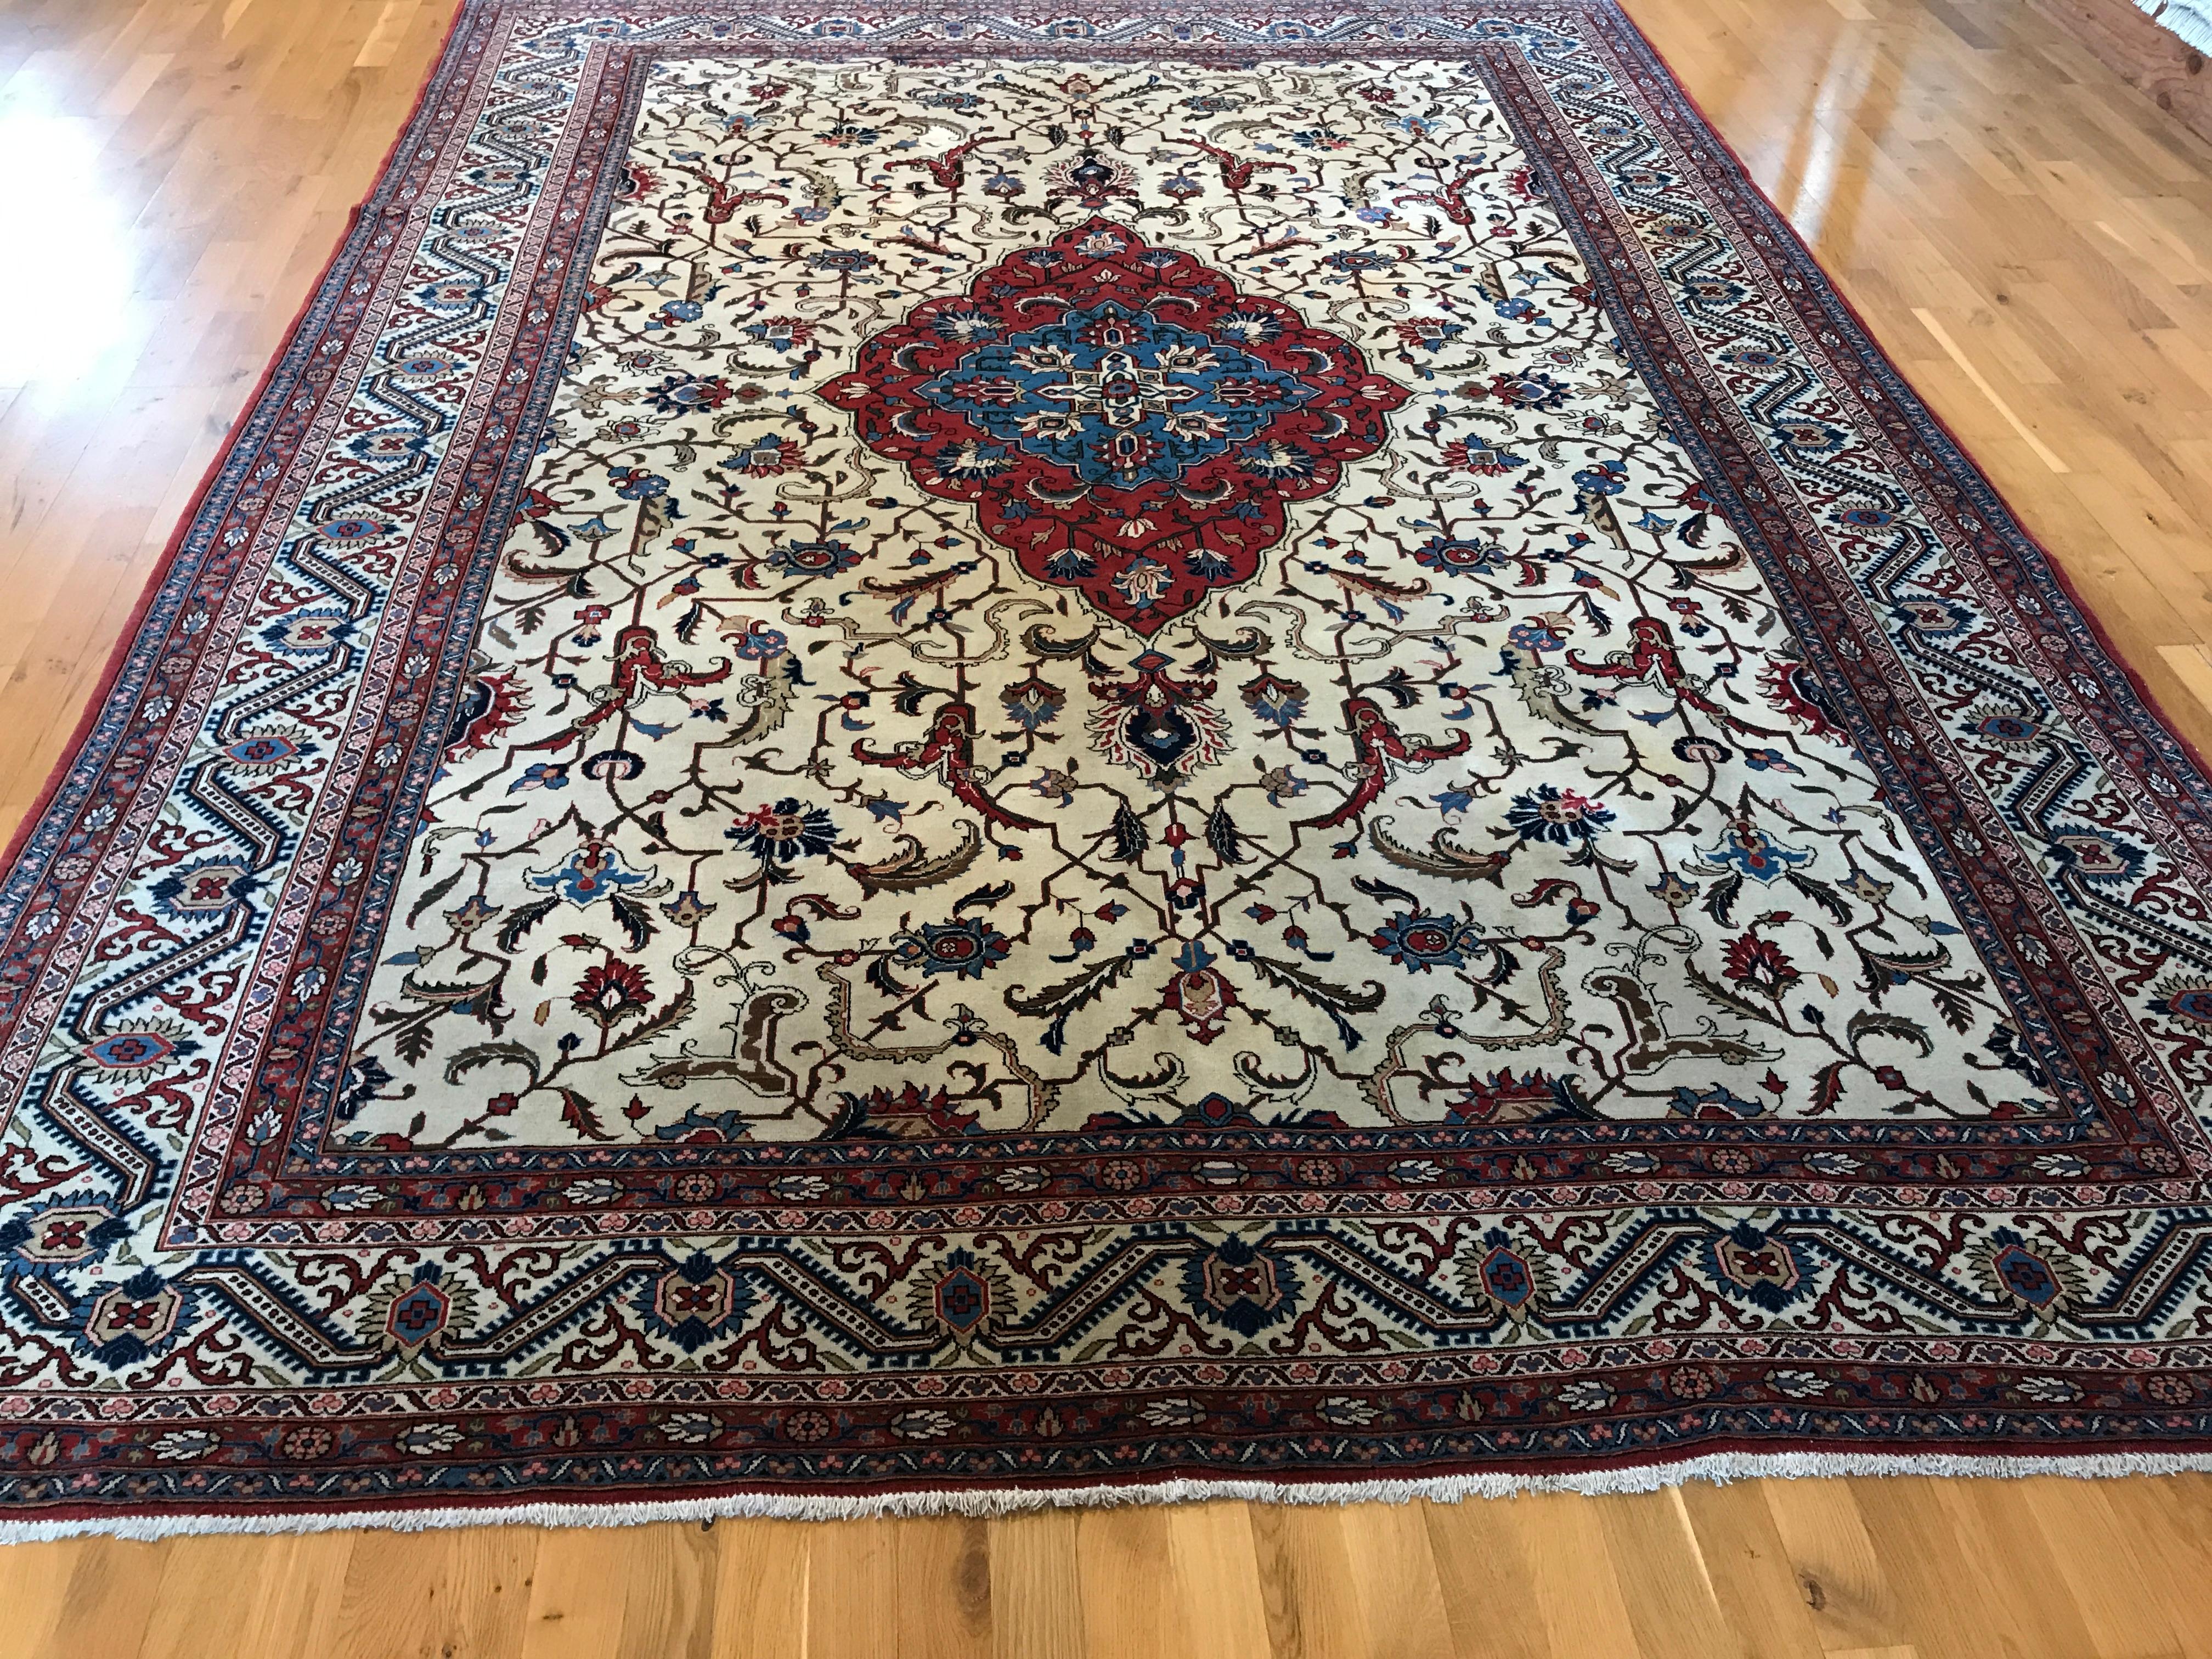 Exude elegance and sophistication with this antique Persian Trabriz rug. Its exquisite design, crafted with all wool, adds a luxurious touch to any room. Discover the timeless beauty of this piece that has stood the test of time.